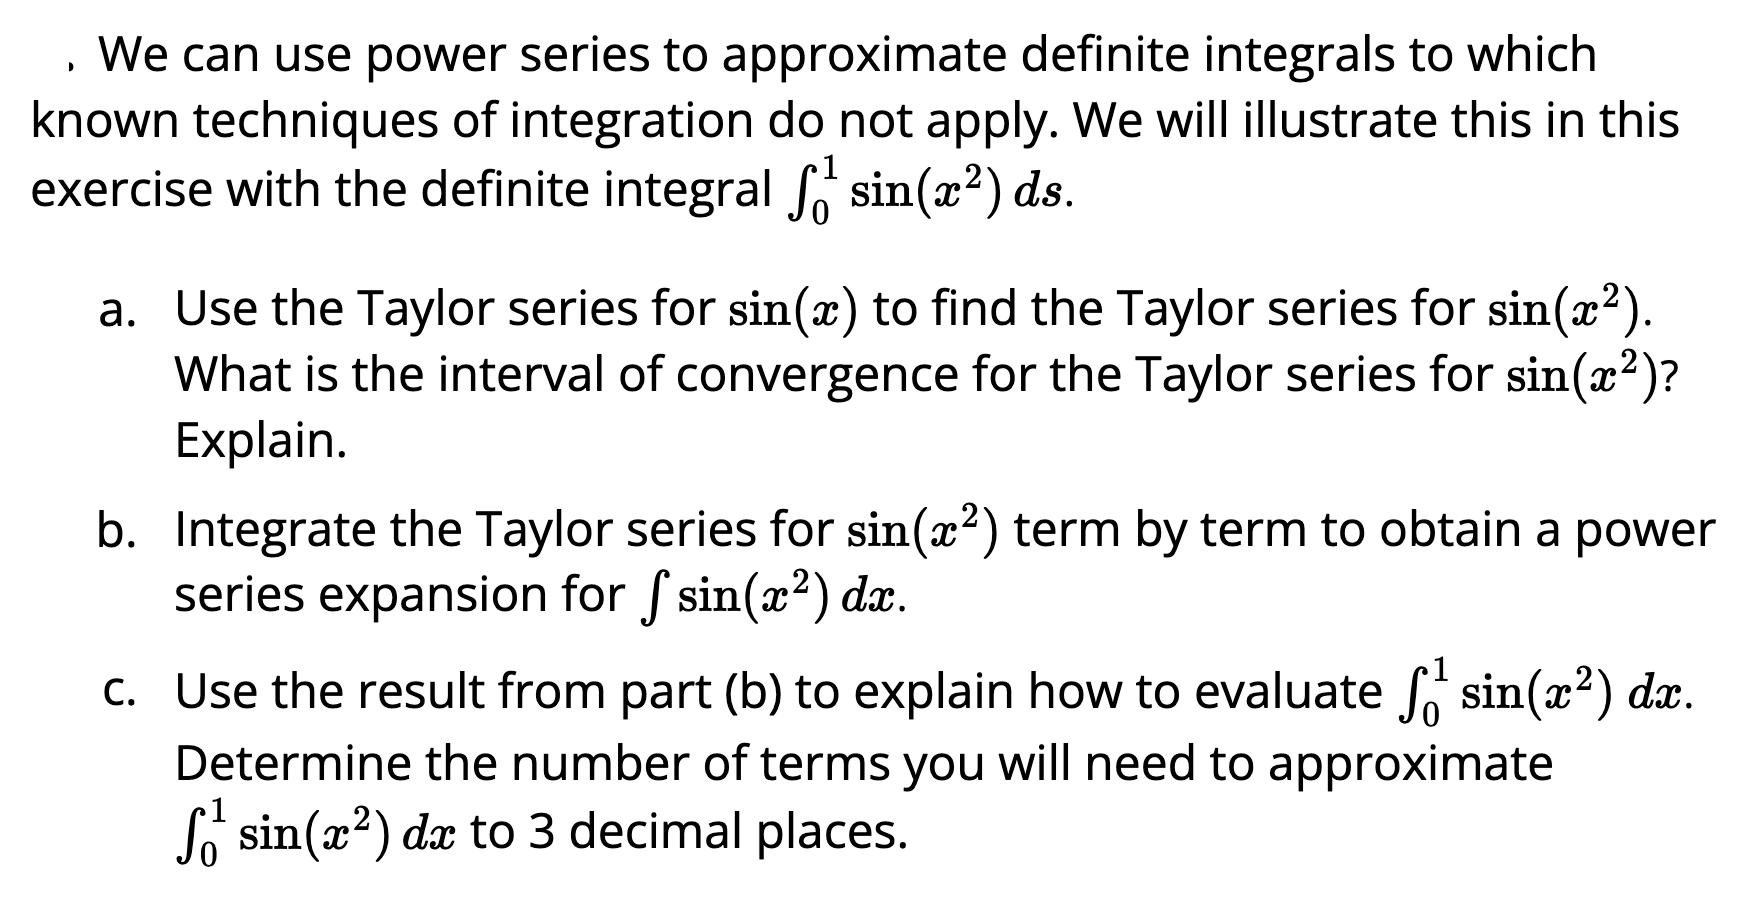 . We can use power series to approximate definite integrals to which known techniques of integration do not